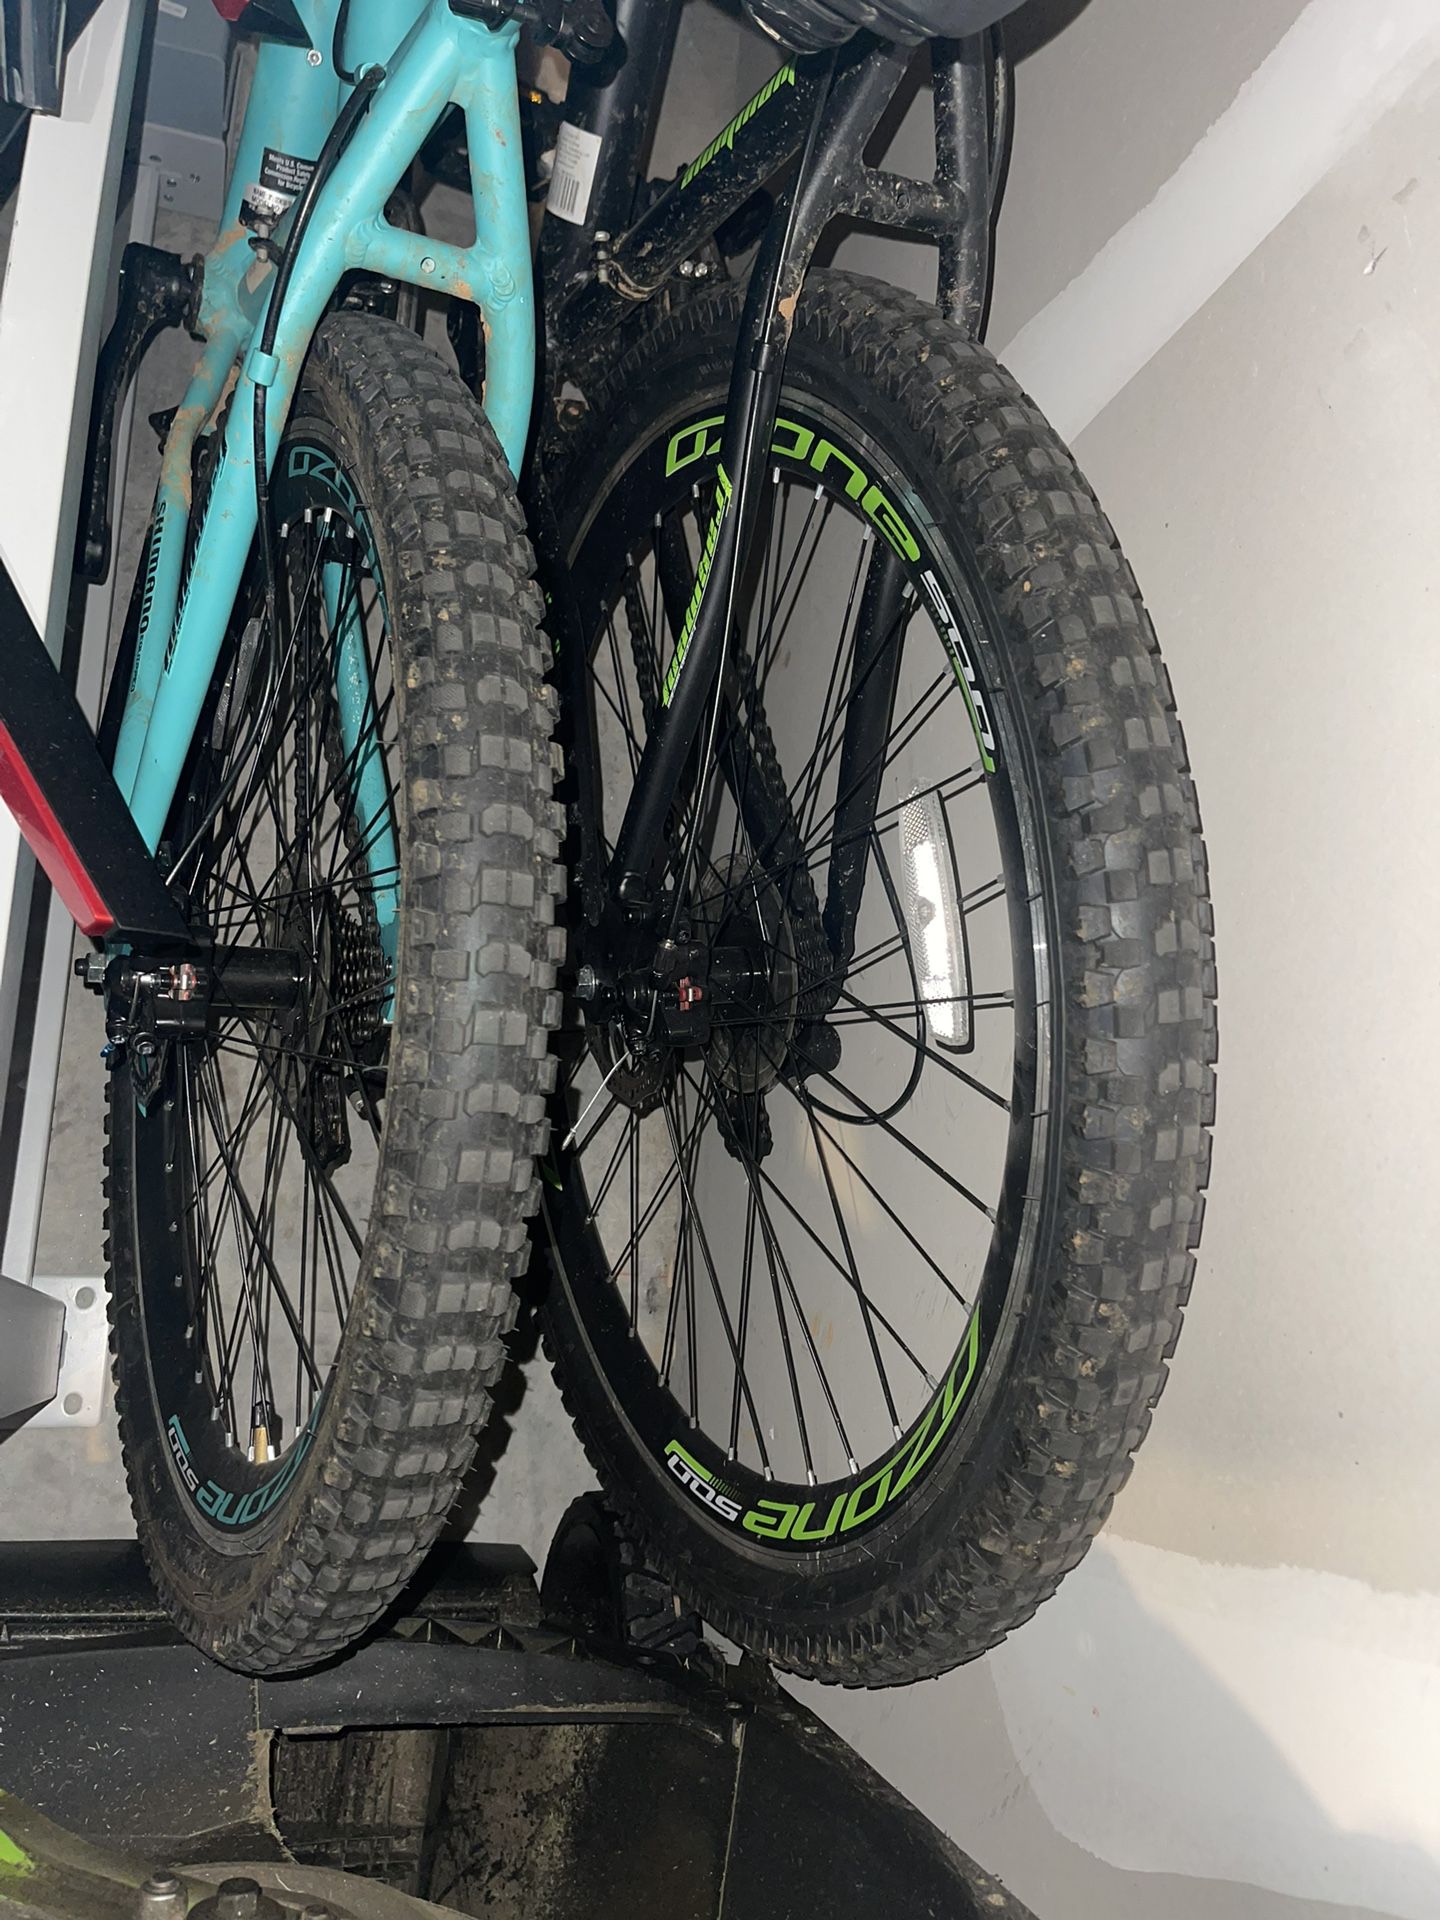 29” and 26” Ozone Mountain Bikes - Gear Issues